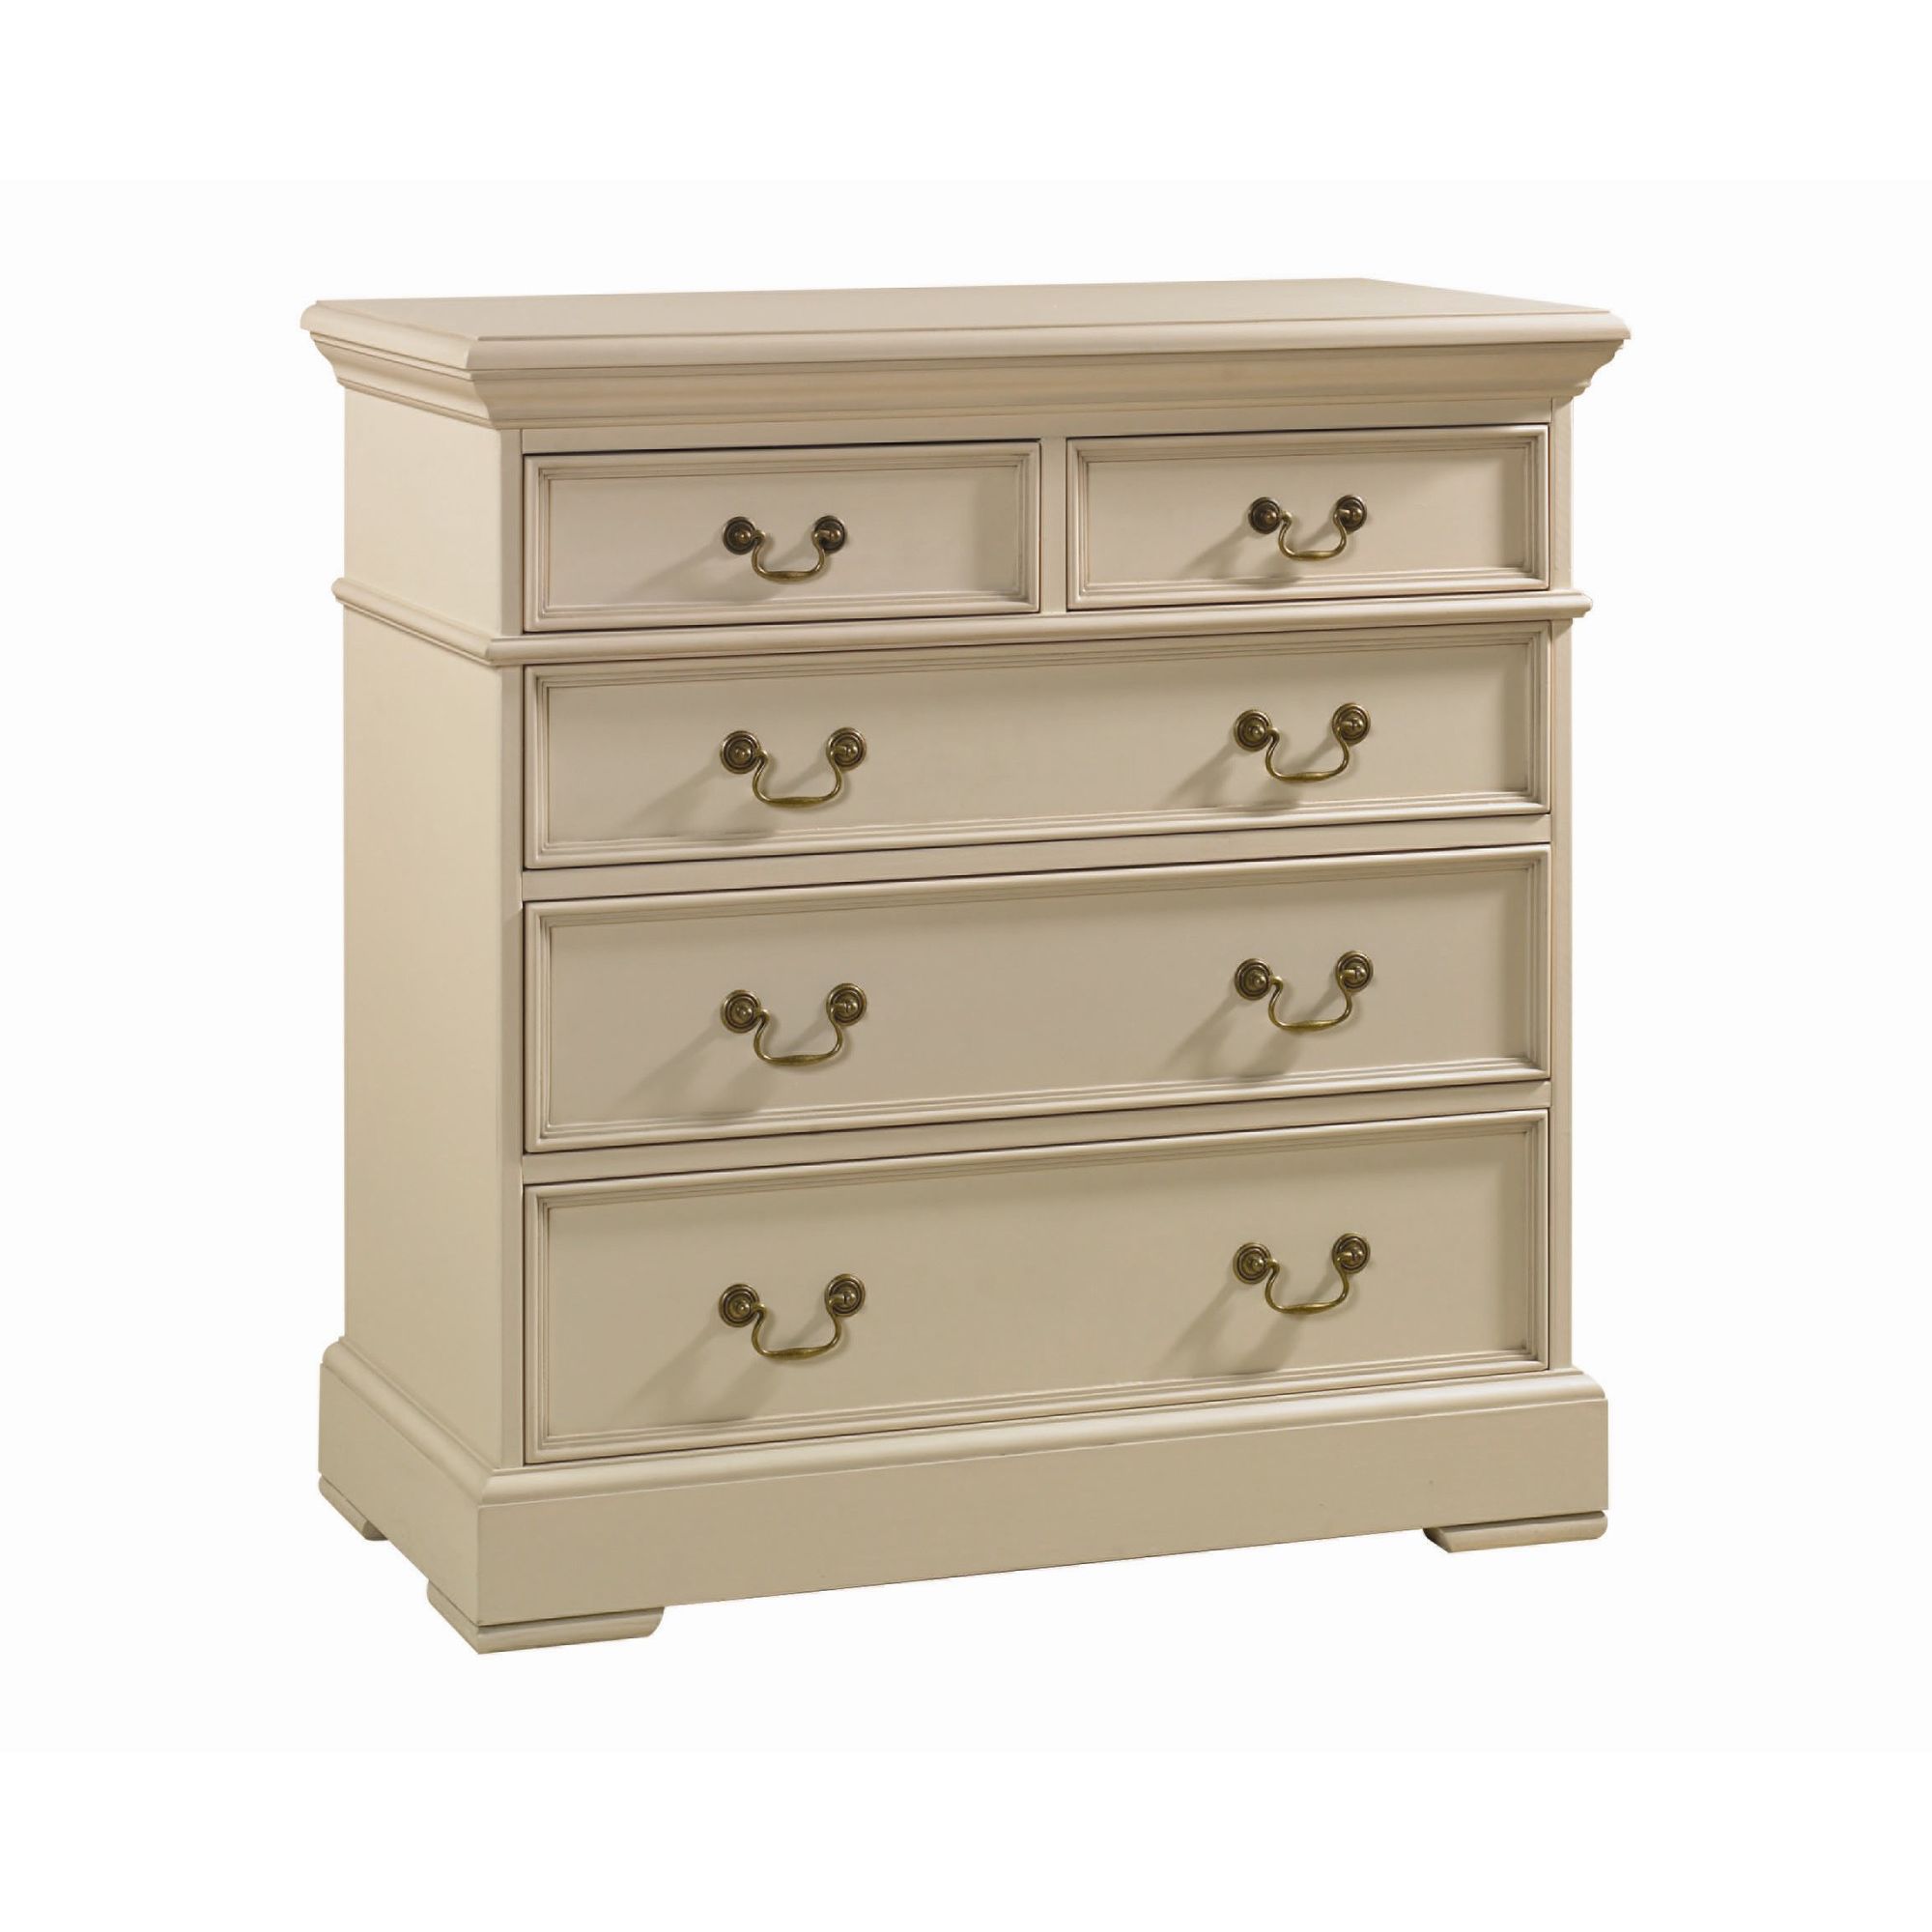 YP Furniture Country House Five Drawer Chest - Oak Top and Ivory at Tesco Direct